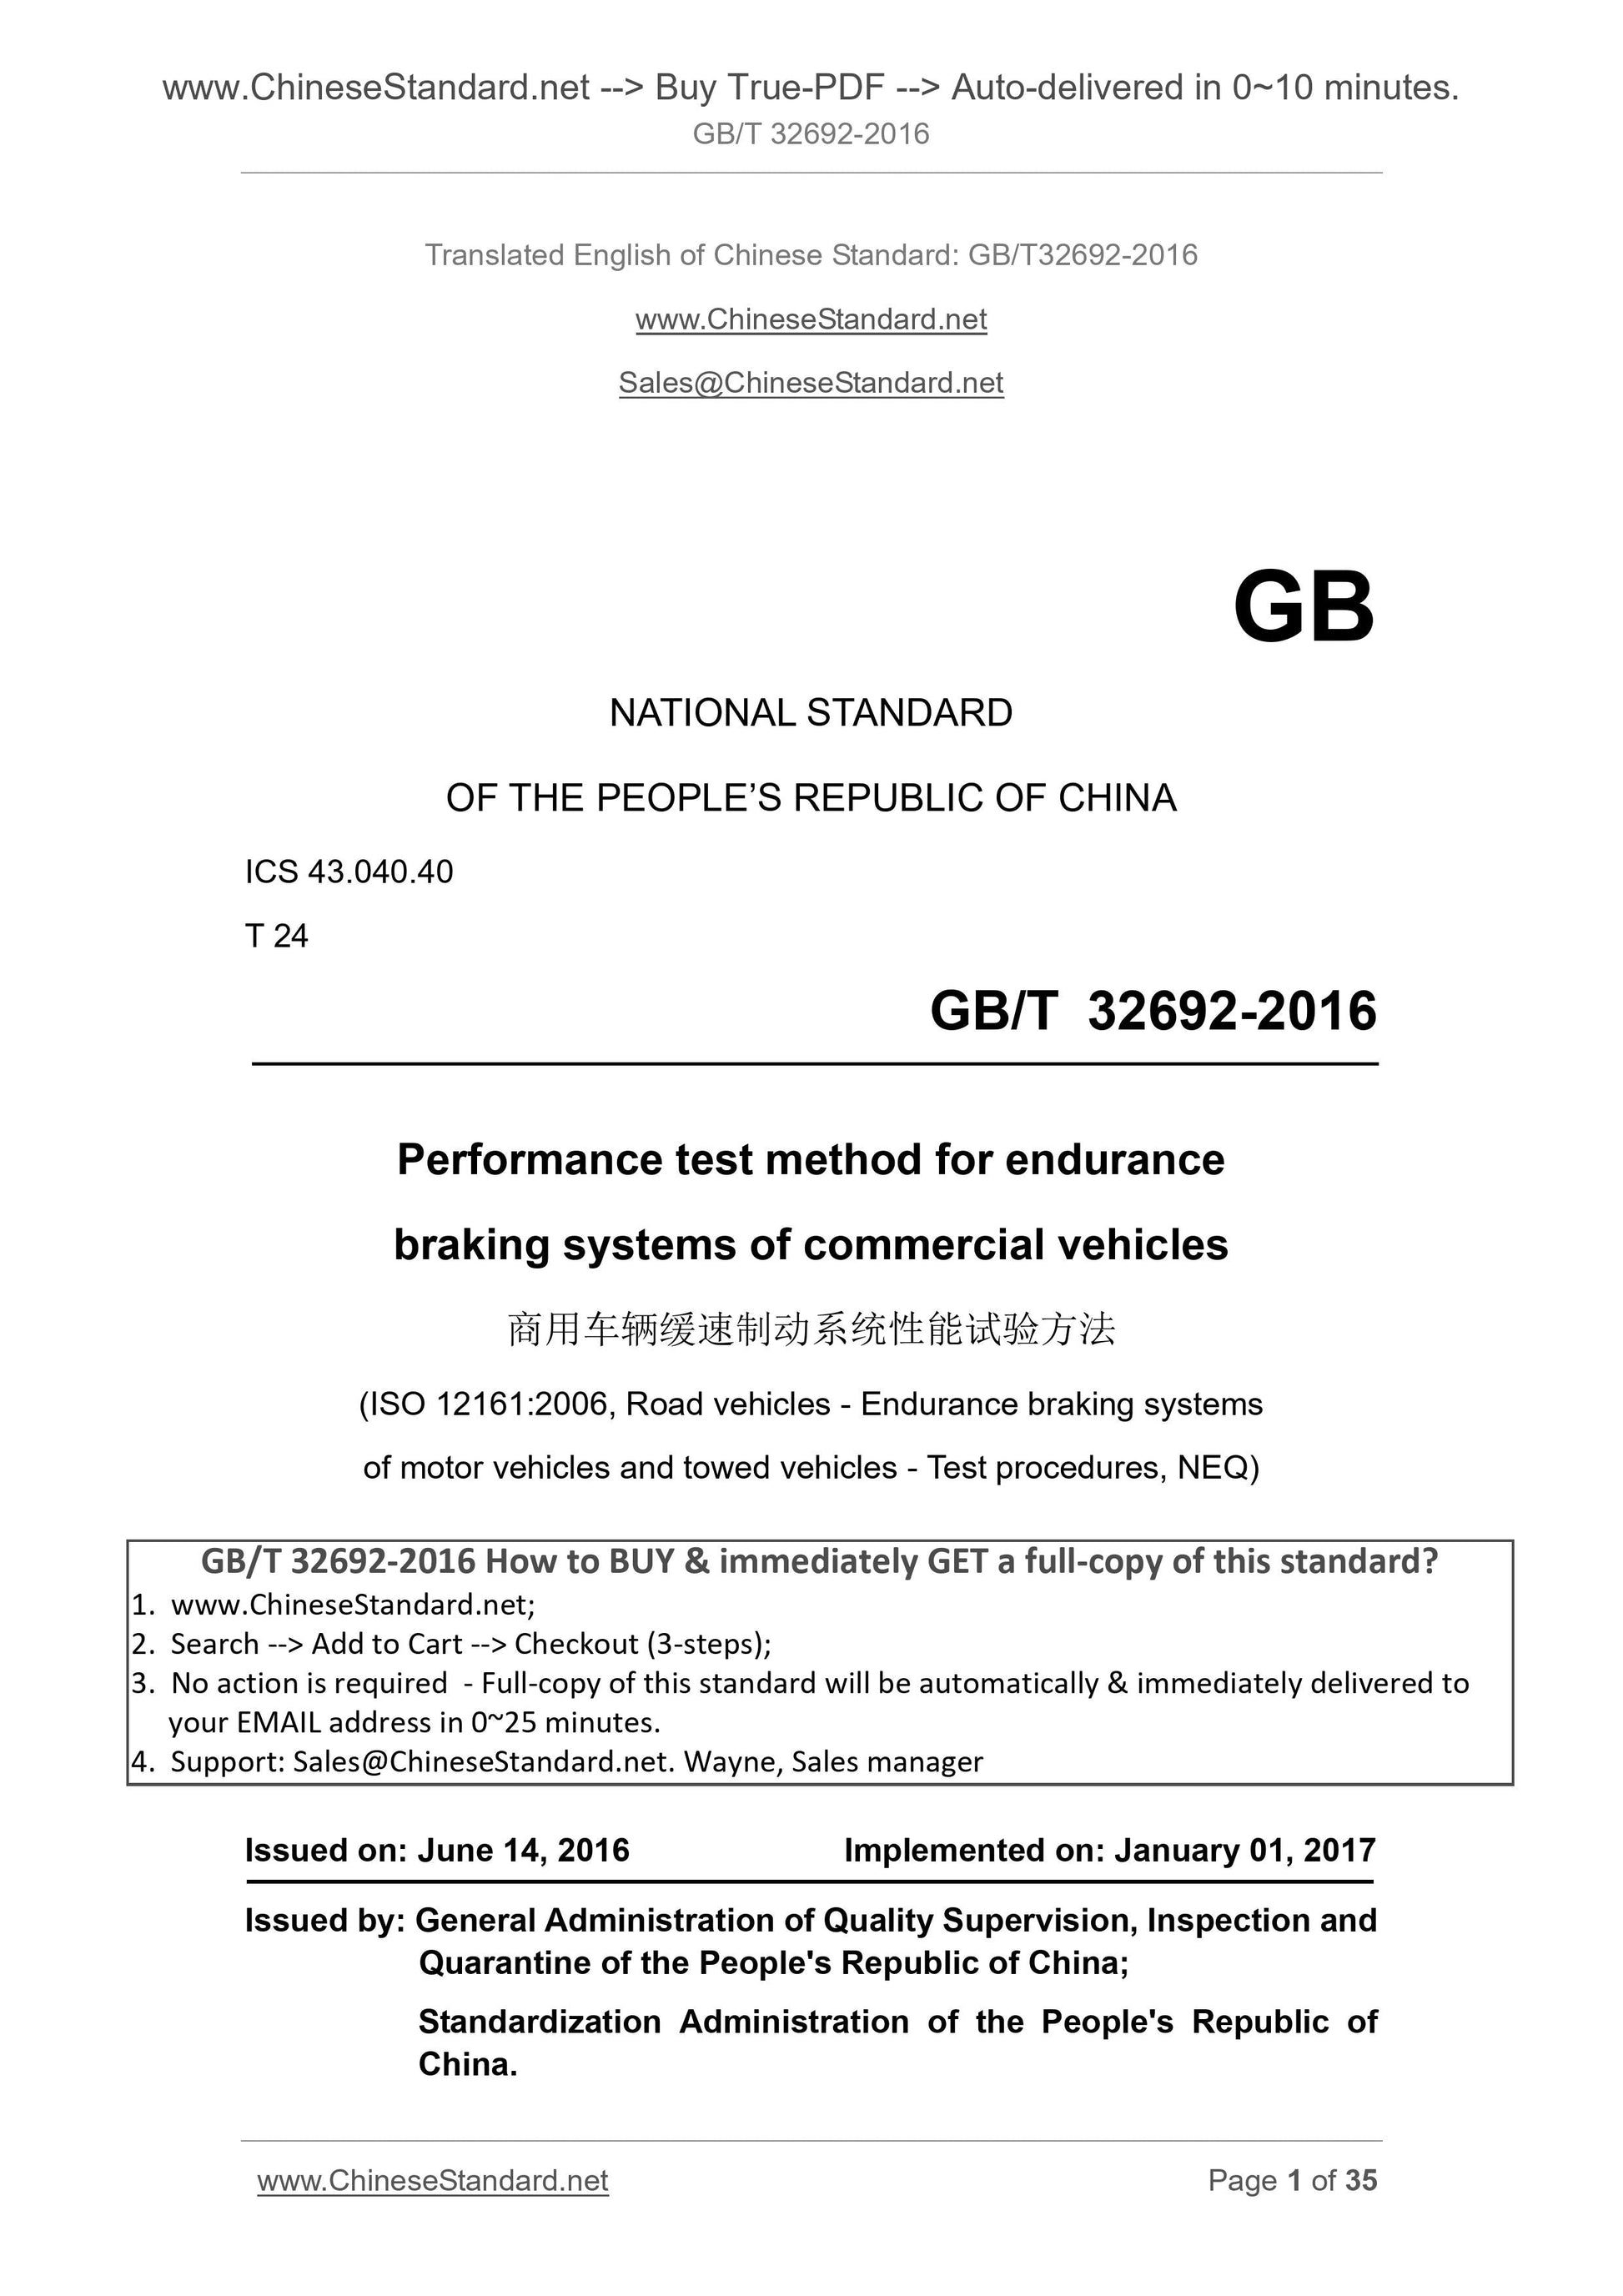 GB/T 32692-2016 Page 1